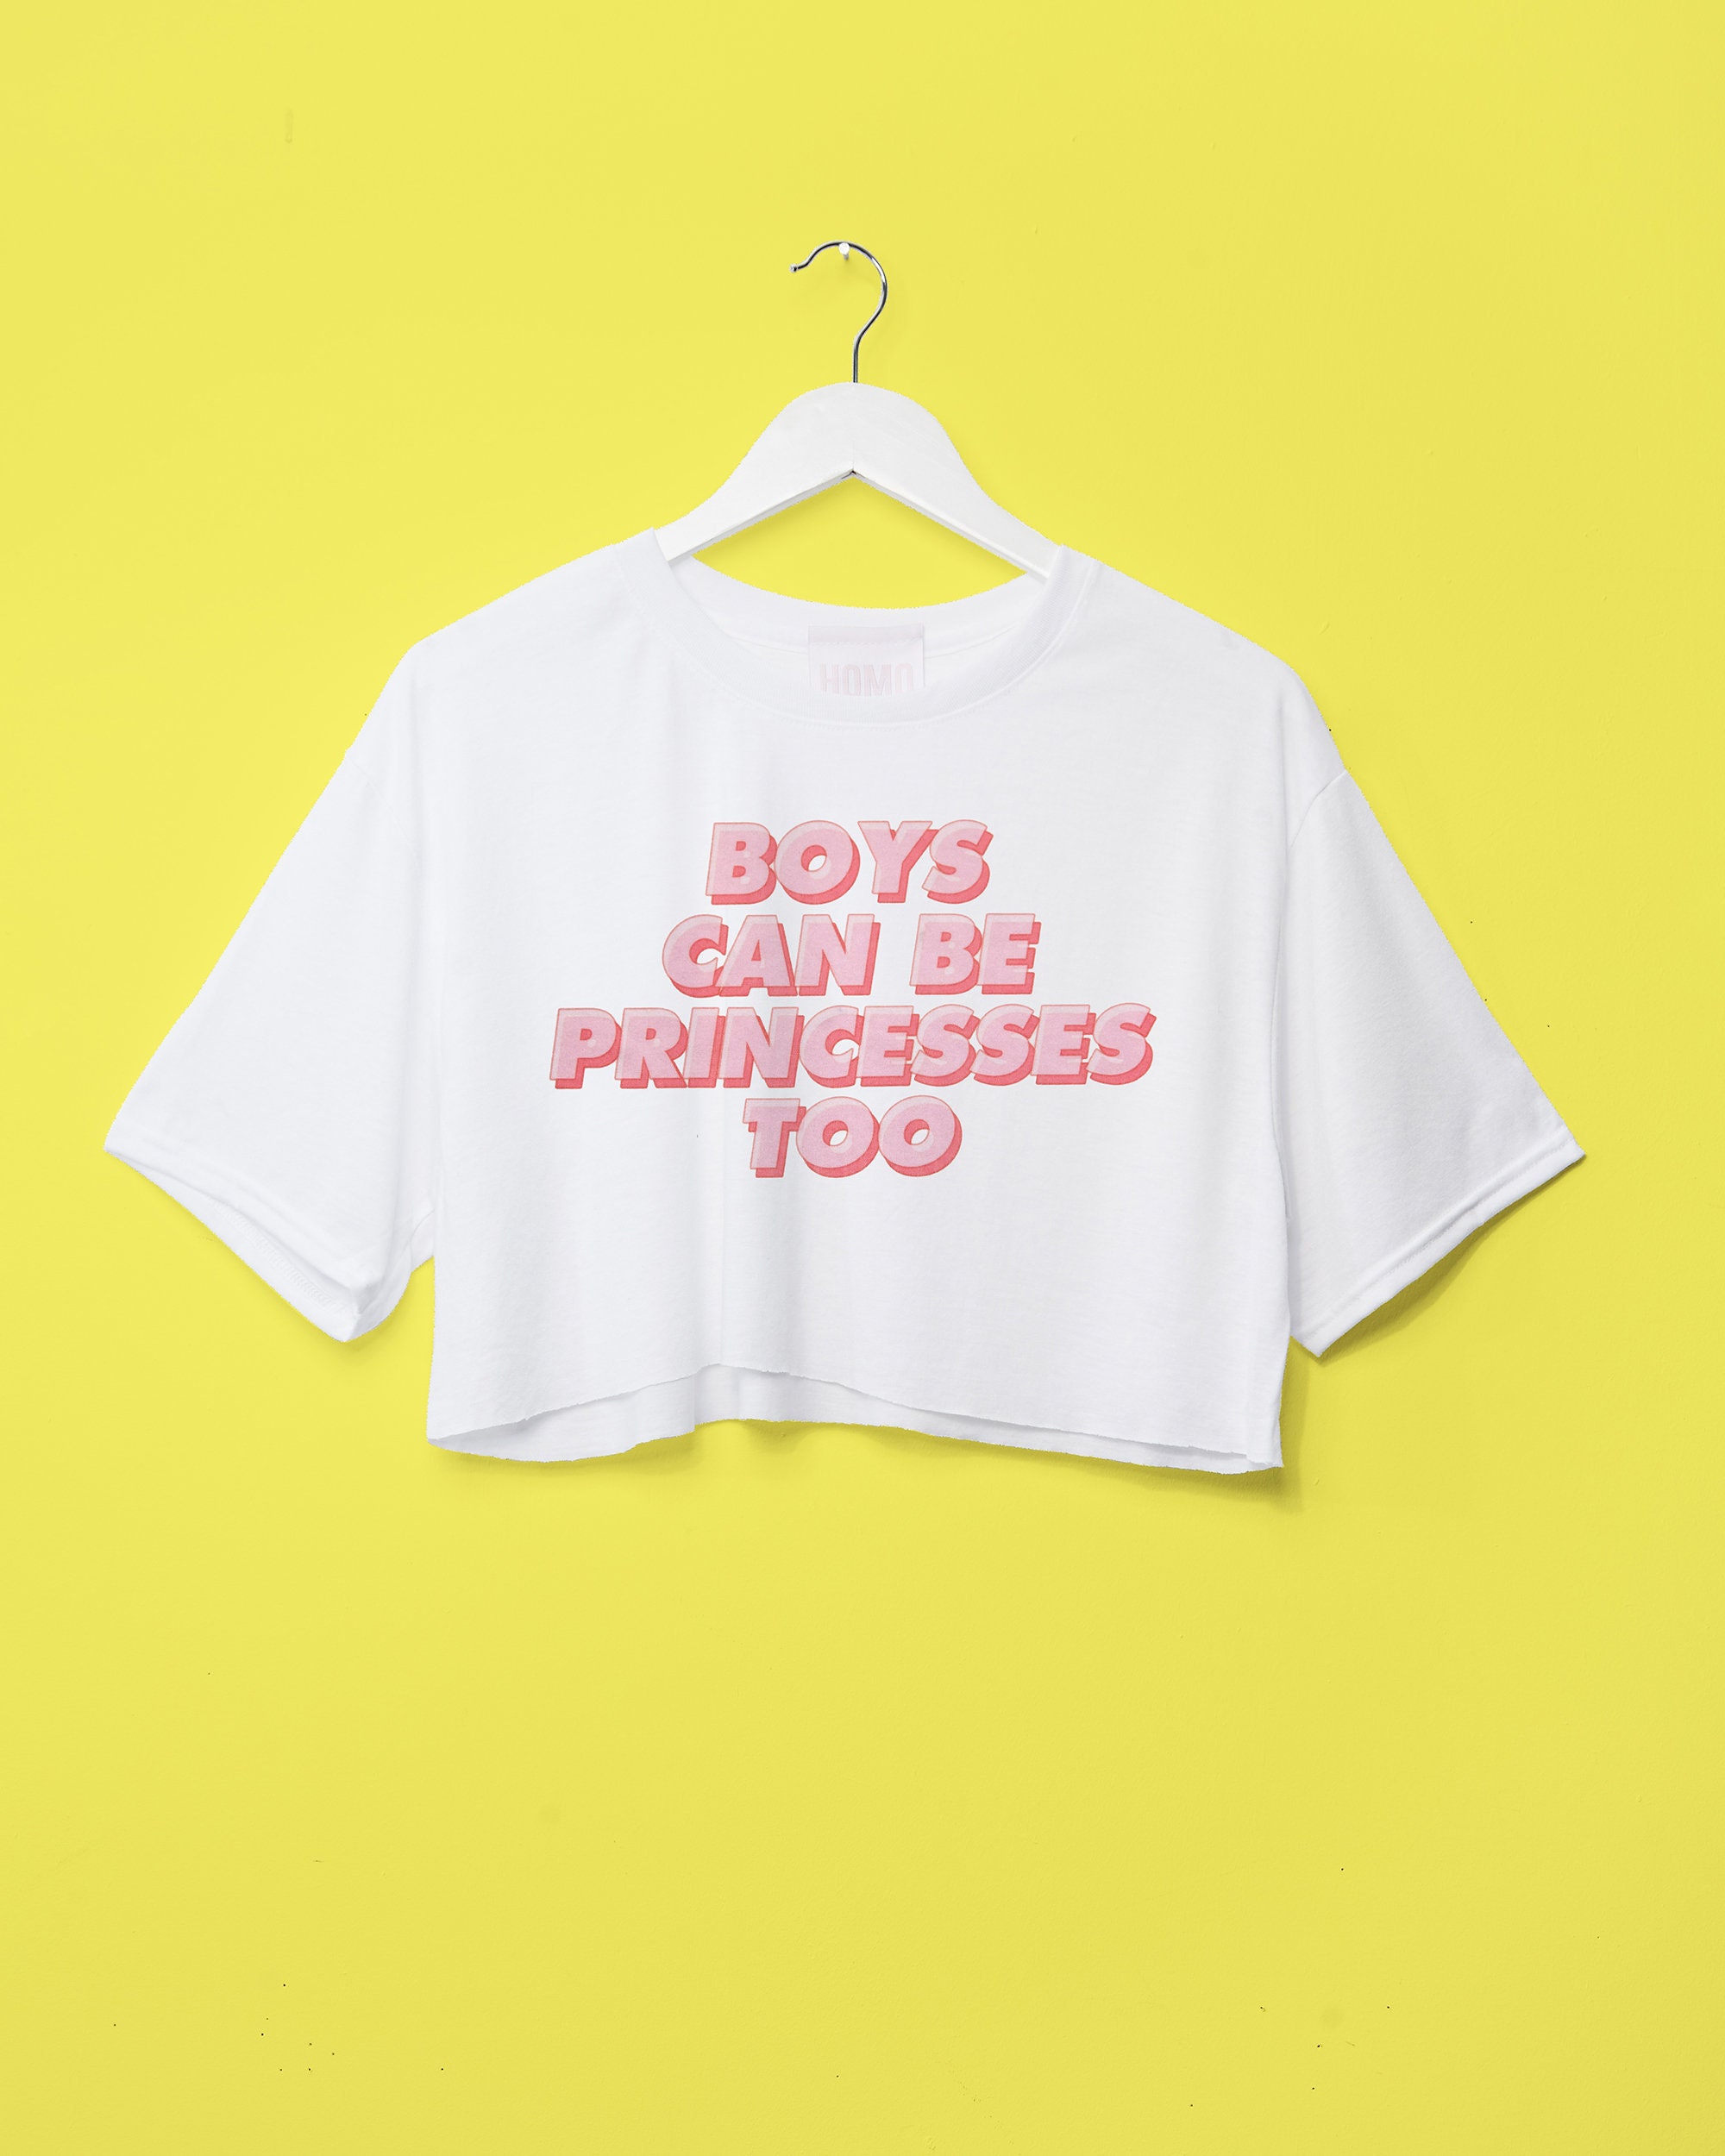 Aesthetic Summer Baby Tee Streetwear Gothic Harajuku loded diper letter  Graphic emo T-shirt Vintage Crop Top Women Y2K clothes